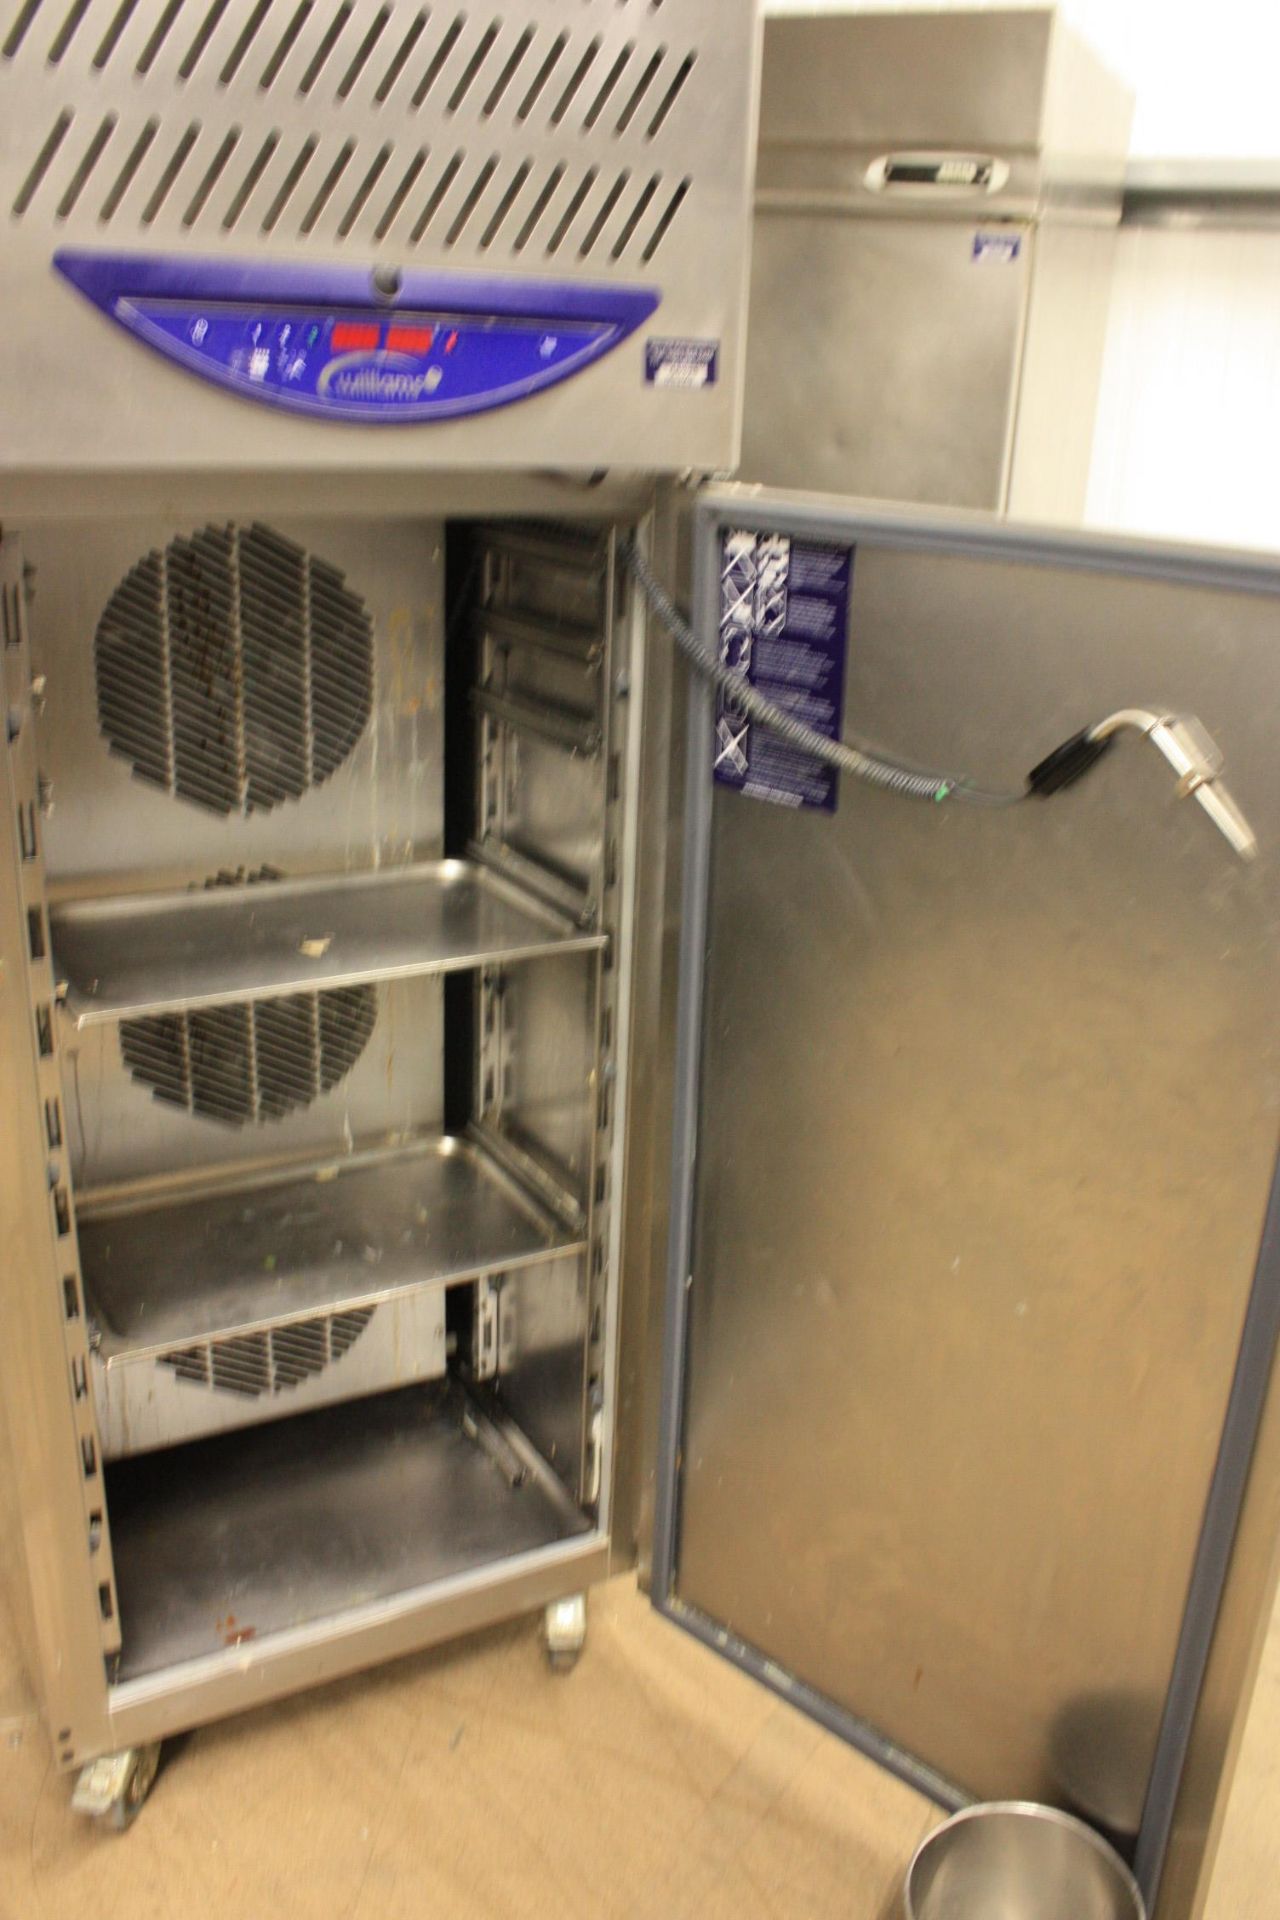 Williams upright gastronome fridge with probe. Height 1900mm x width 700mm x depth 800mm. - Image 2 of 2